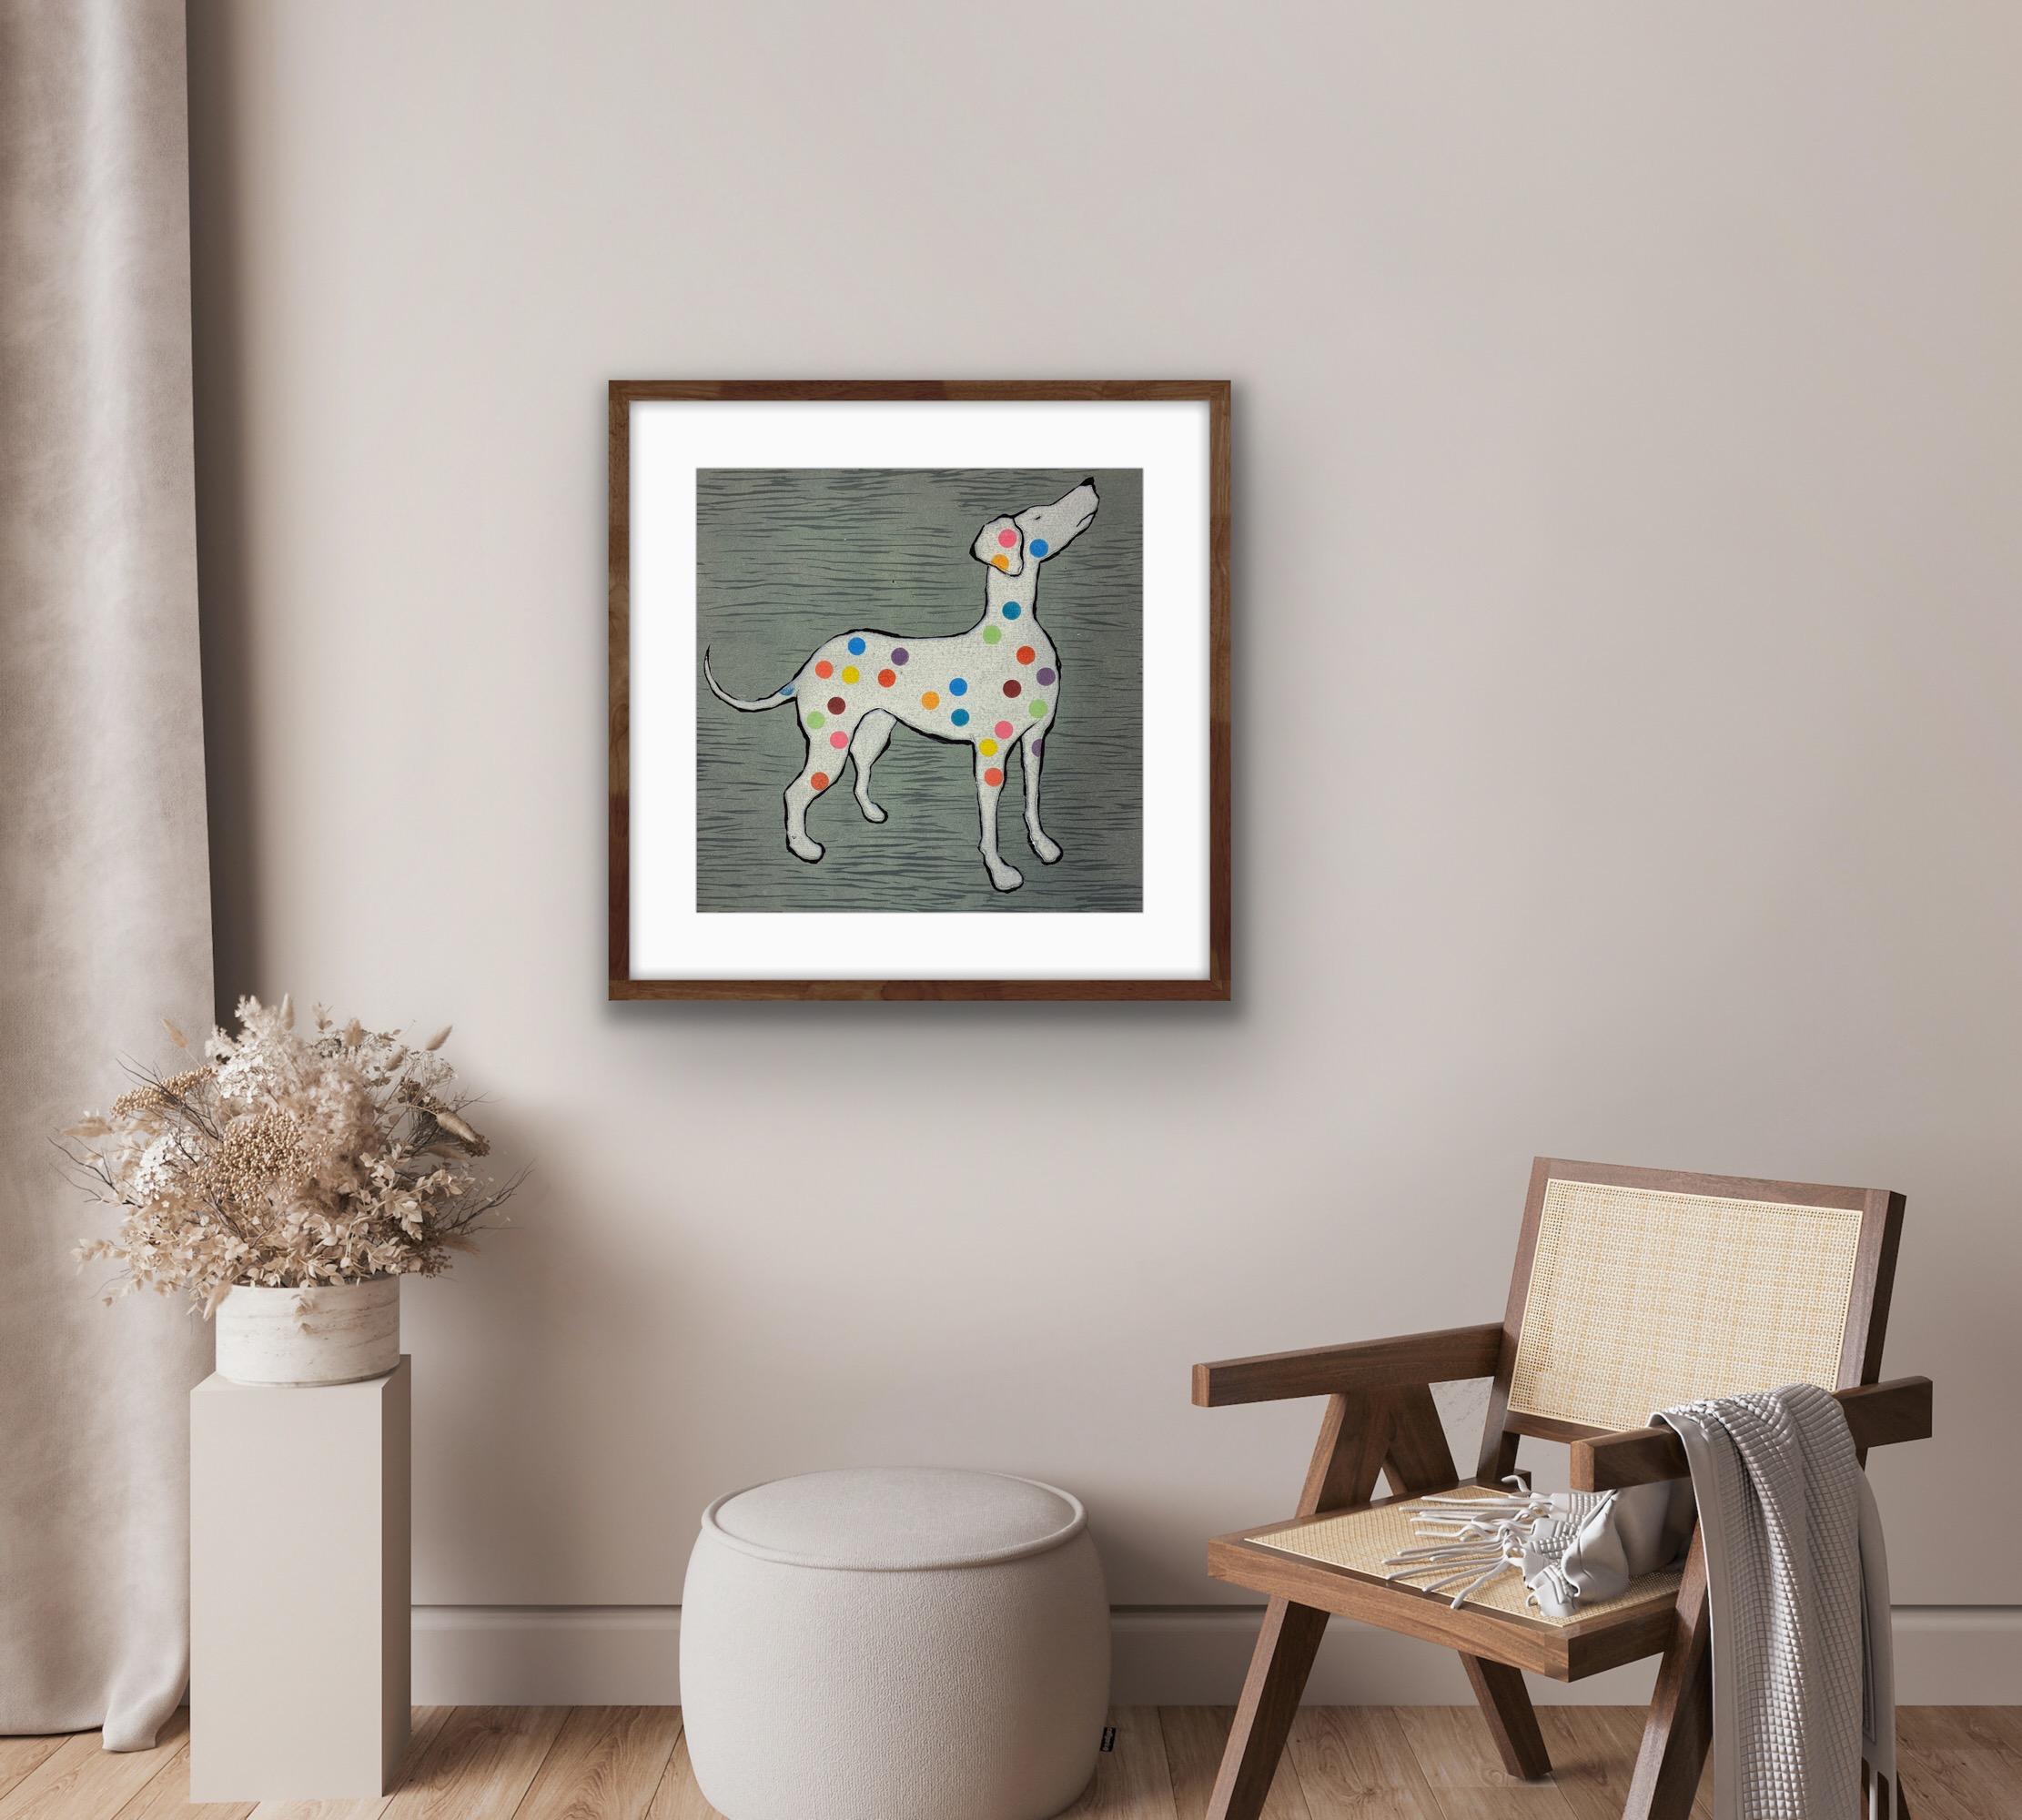 Damien Hirst's Dog, Pictures of Famous Artist's Pets, Damien Hirst Spots Style For Sale 4